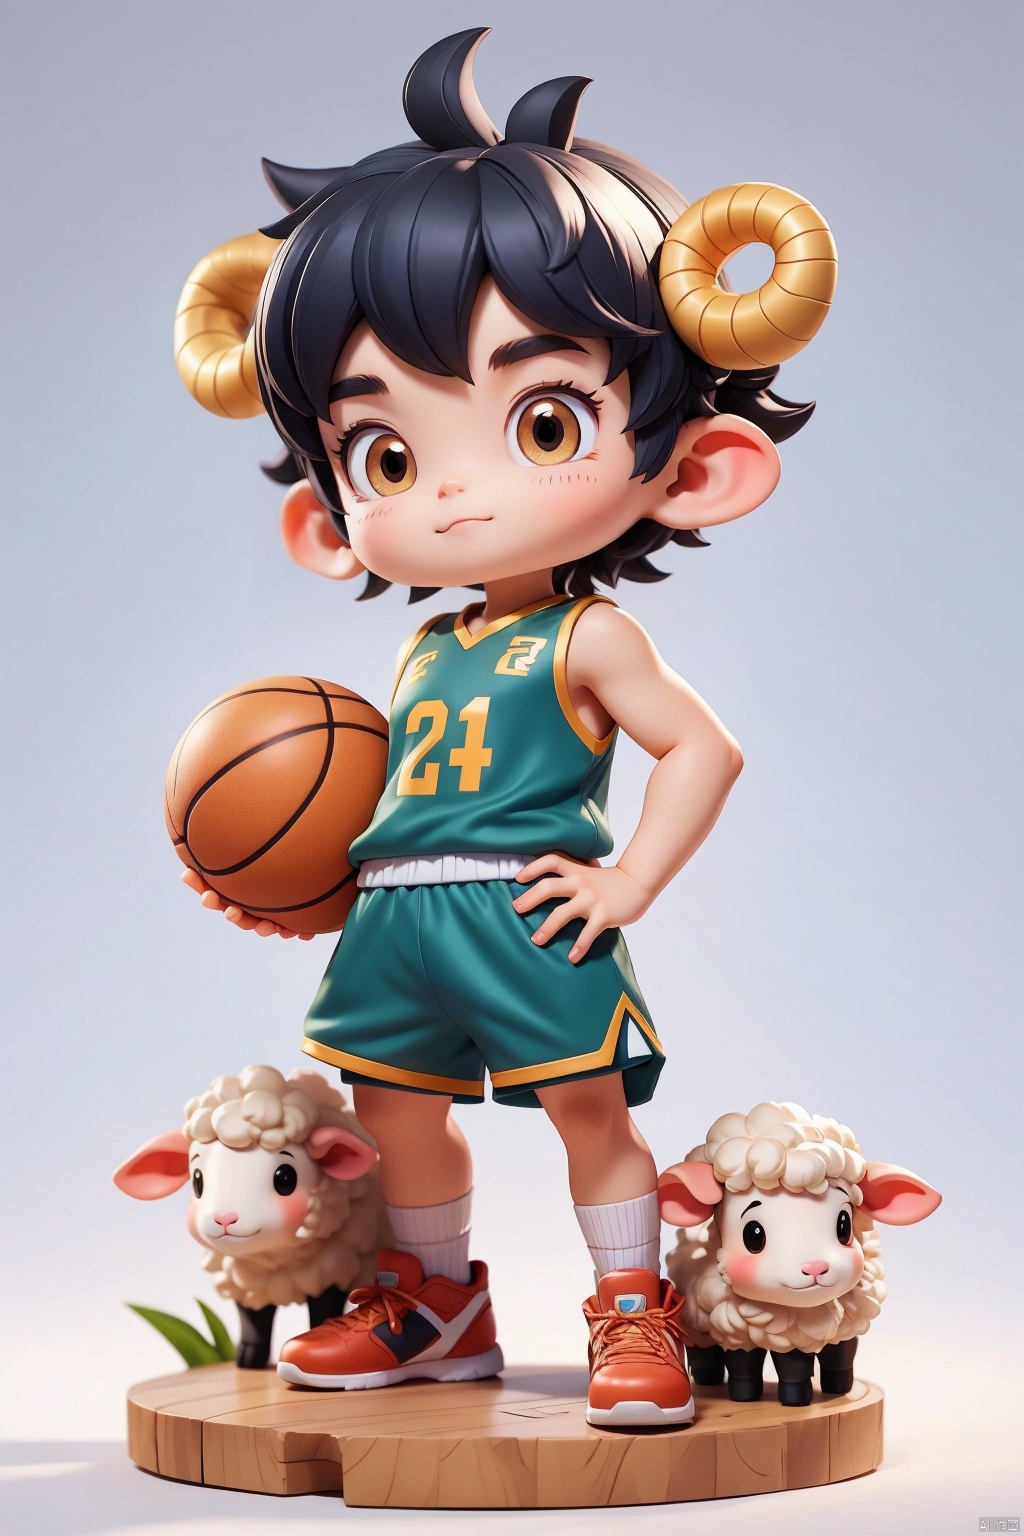  1 boy, sheep IP, solo, (Q version :1.2), determined expression, horns, blush, basketball uniform, athlete body, simple white background,